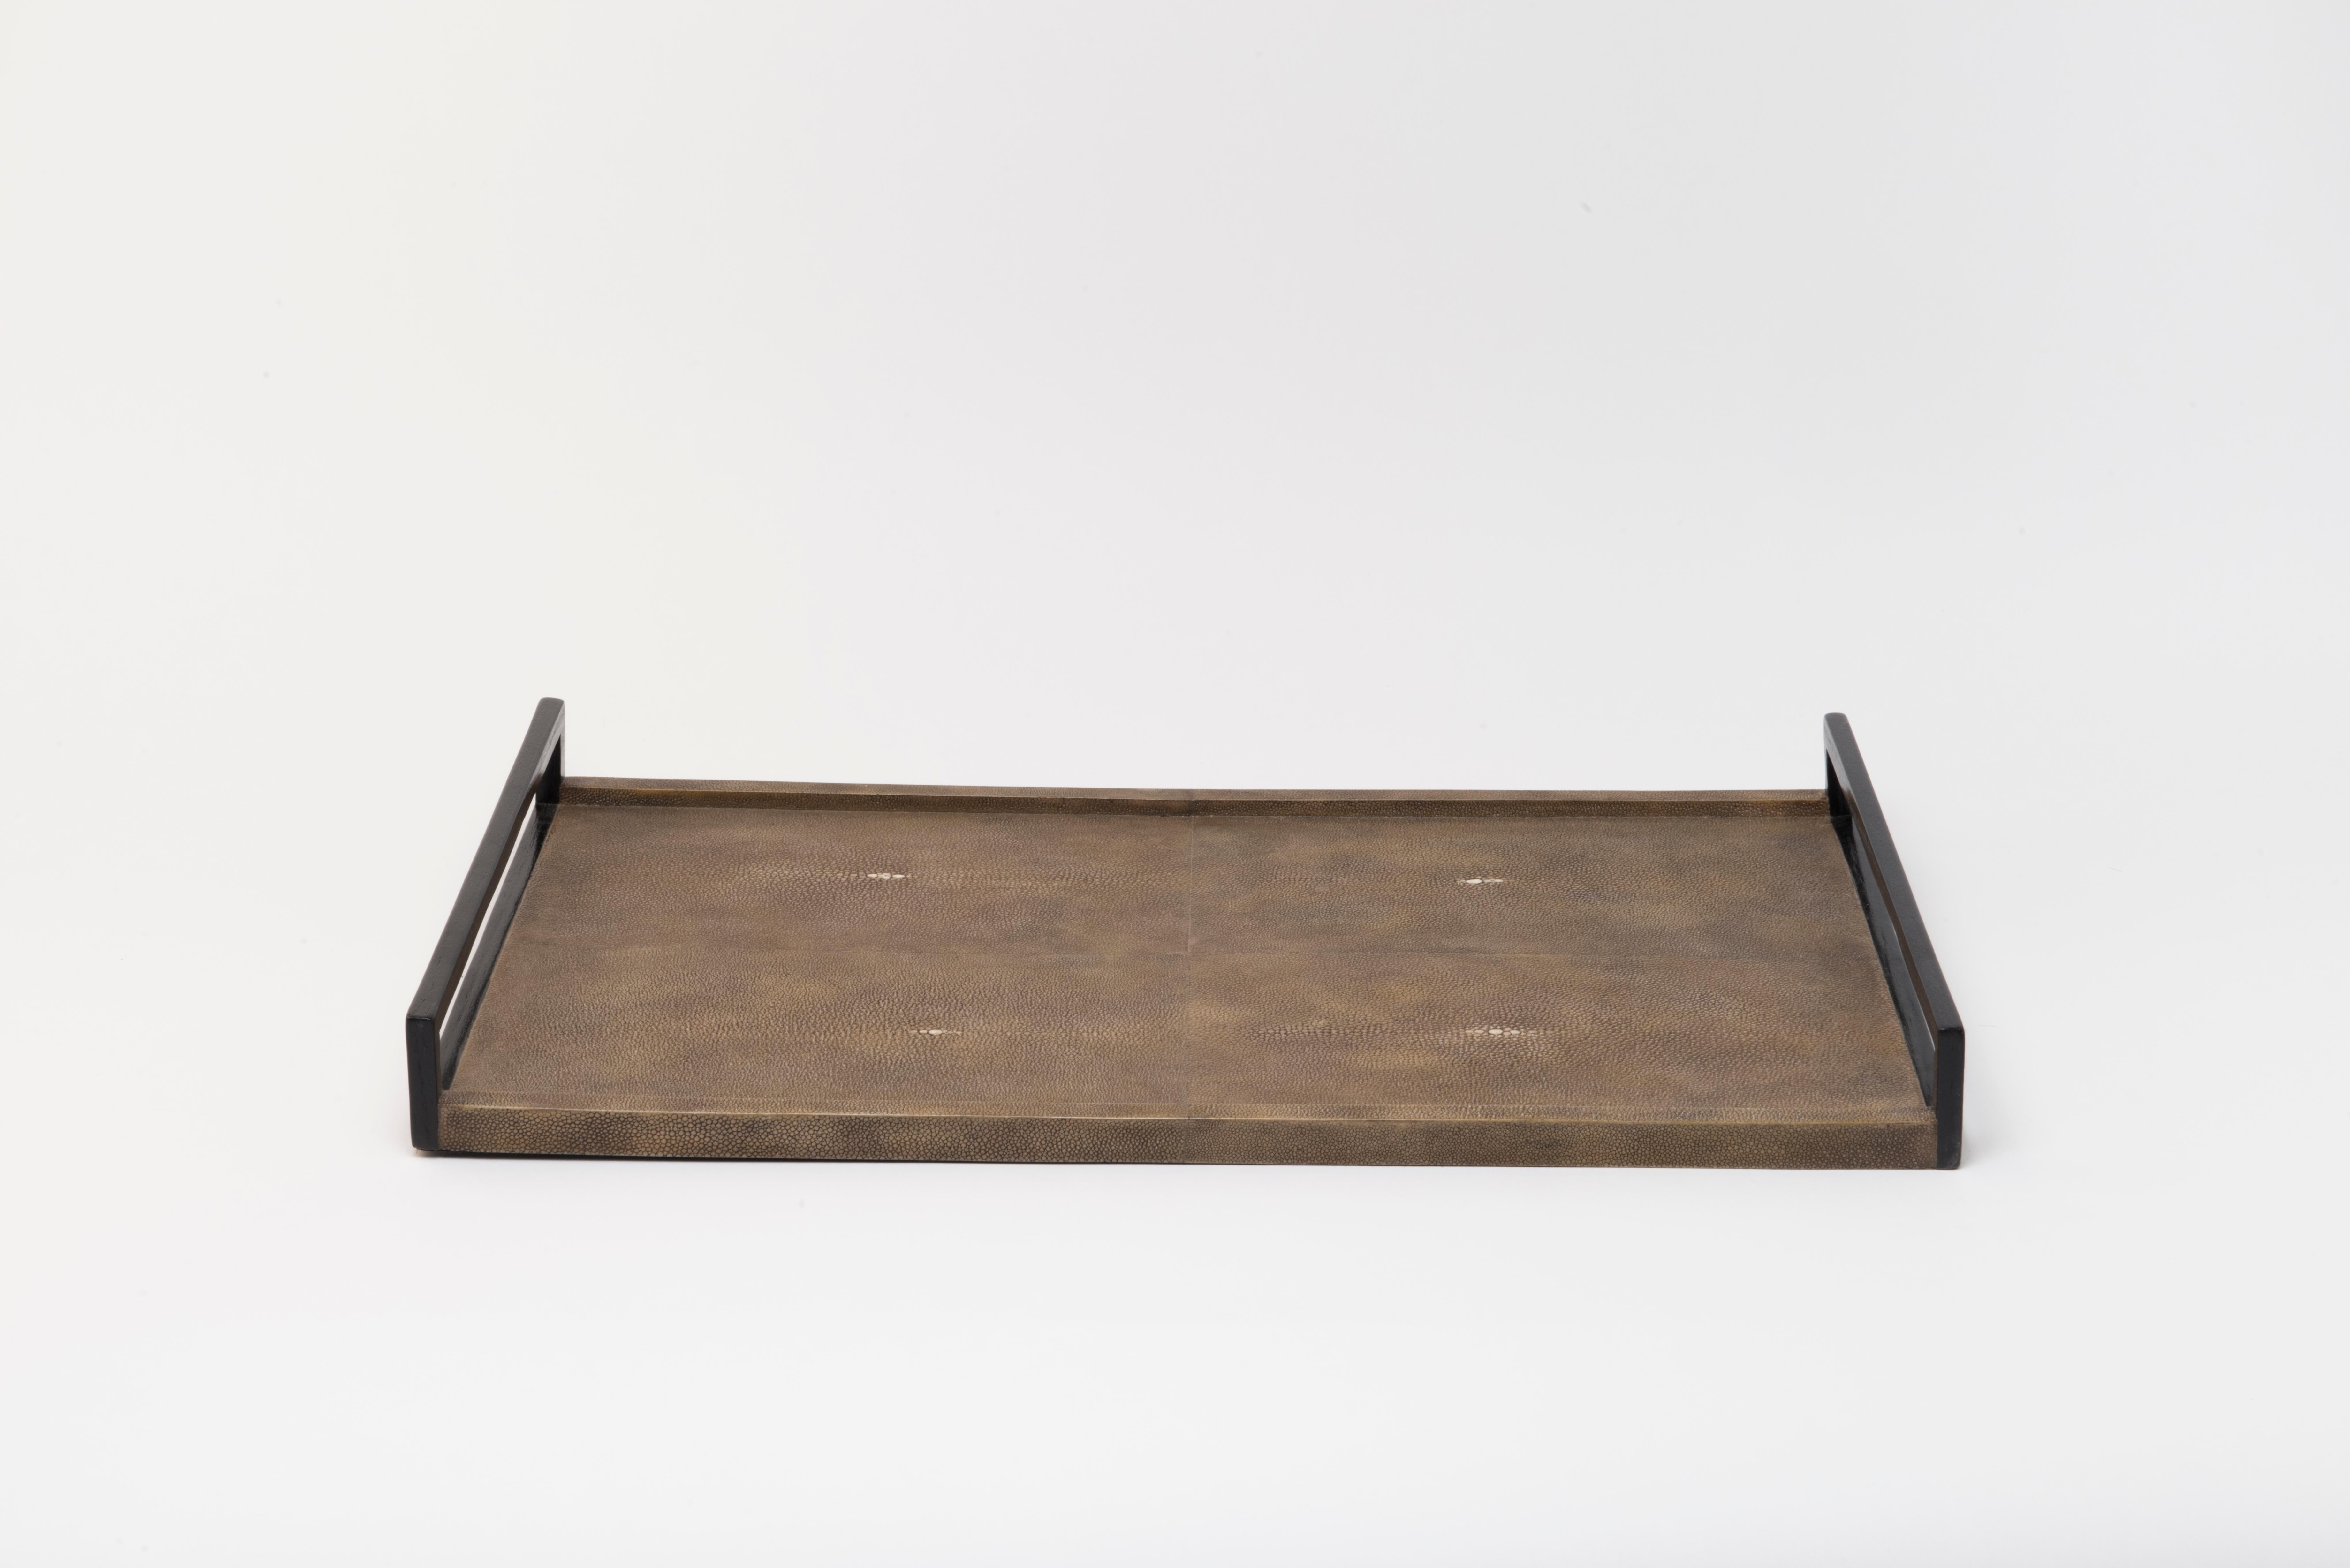 This tray is a luxurious update to the classic piece. Available in other finishes and sizes.

· Handmade

· Shagreen, black wood veneer handles 

· Measures: 61 x 34 x 1.3 cm 

All R & Y Augousti pieces are handmade by artisans, ultimately